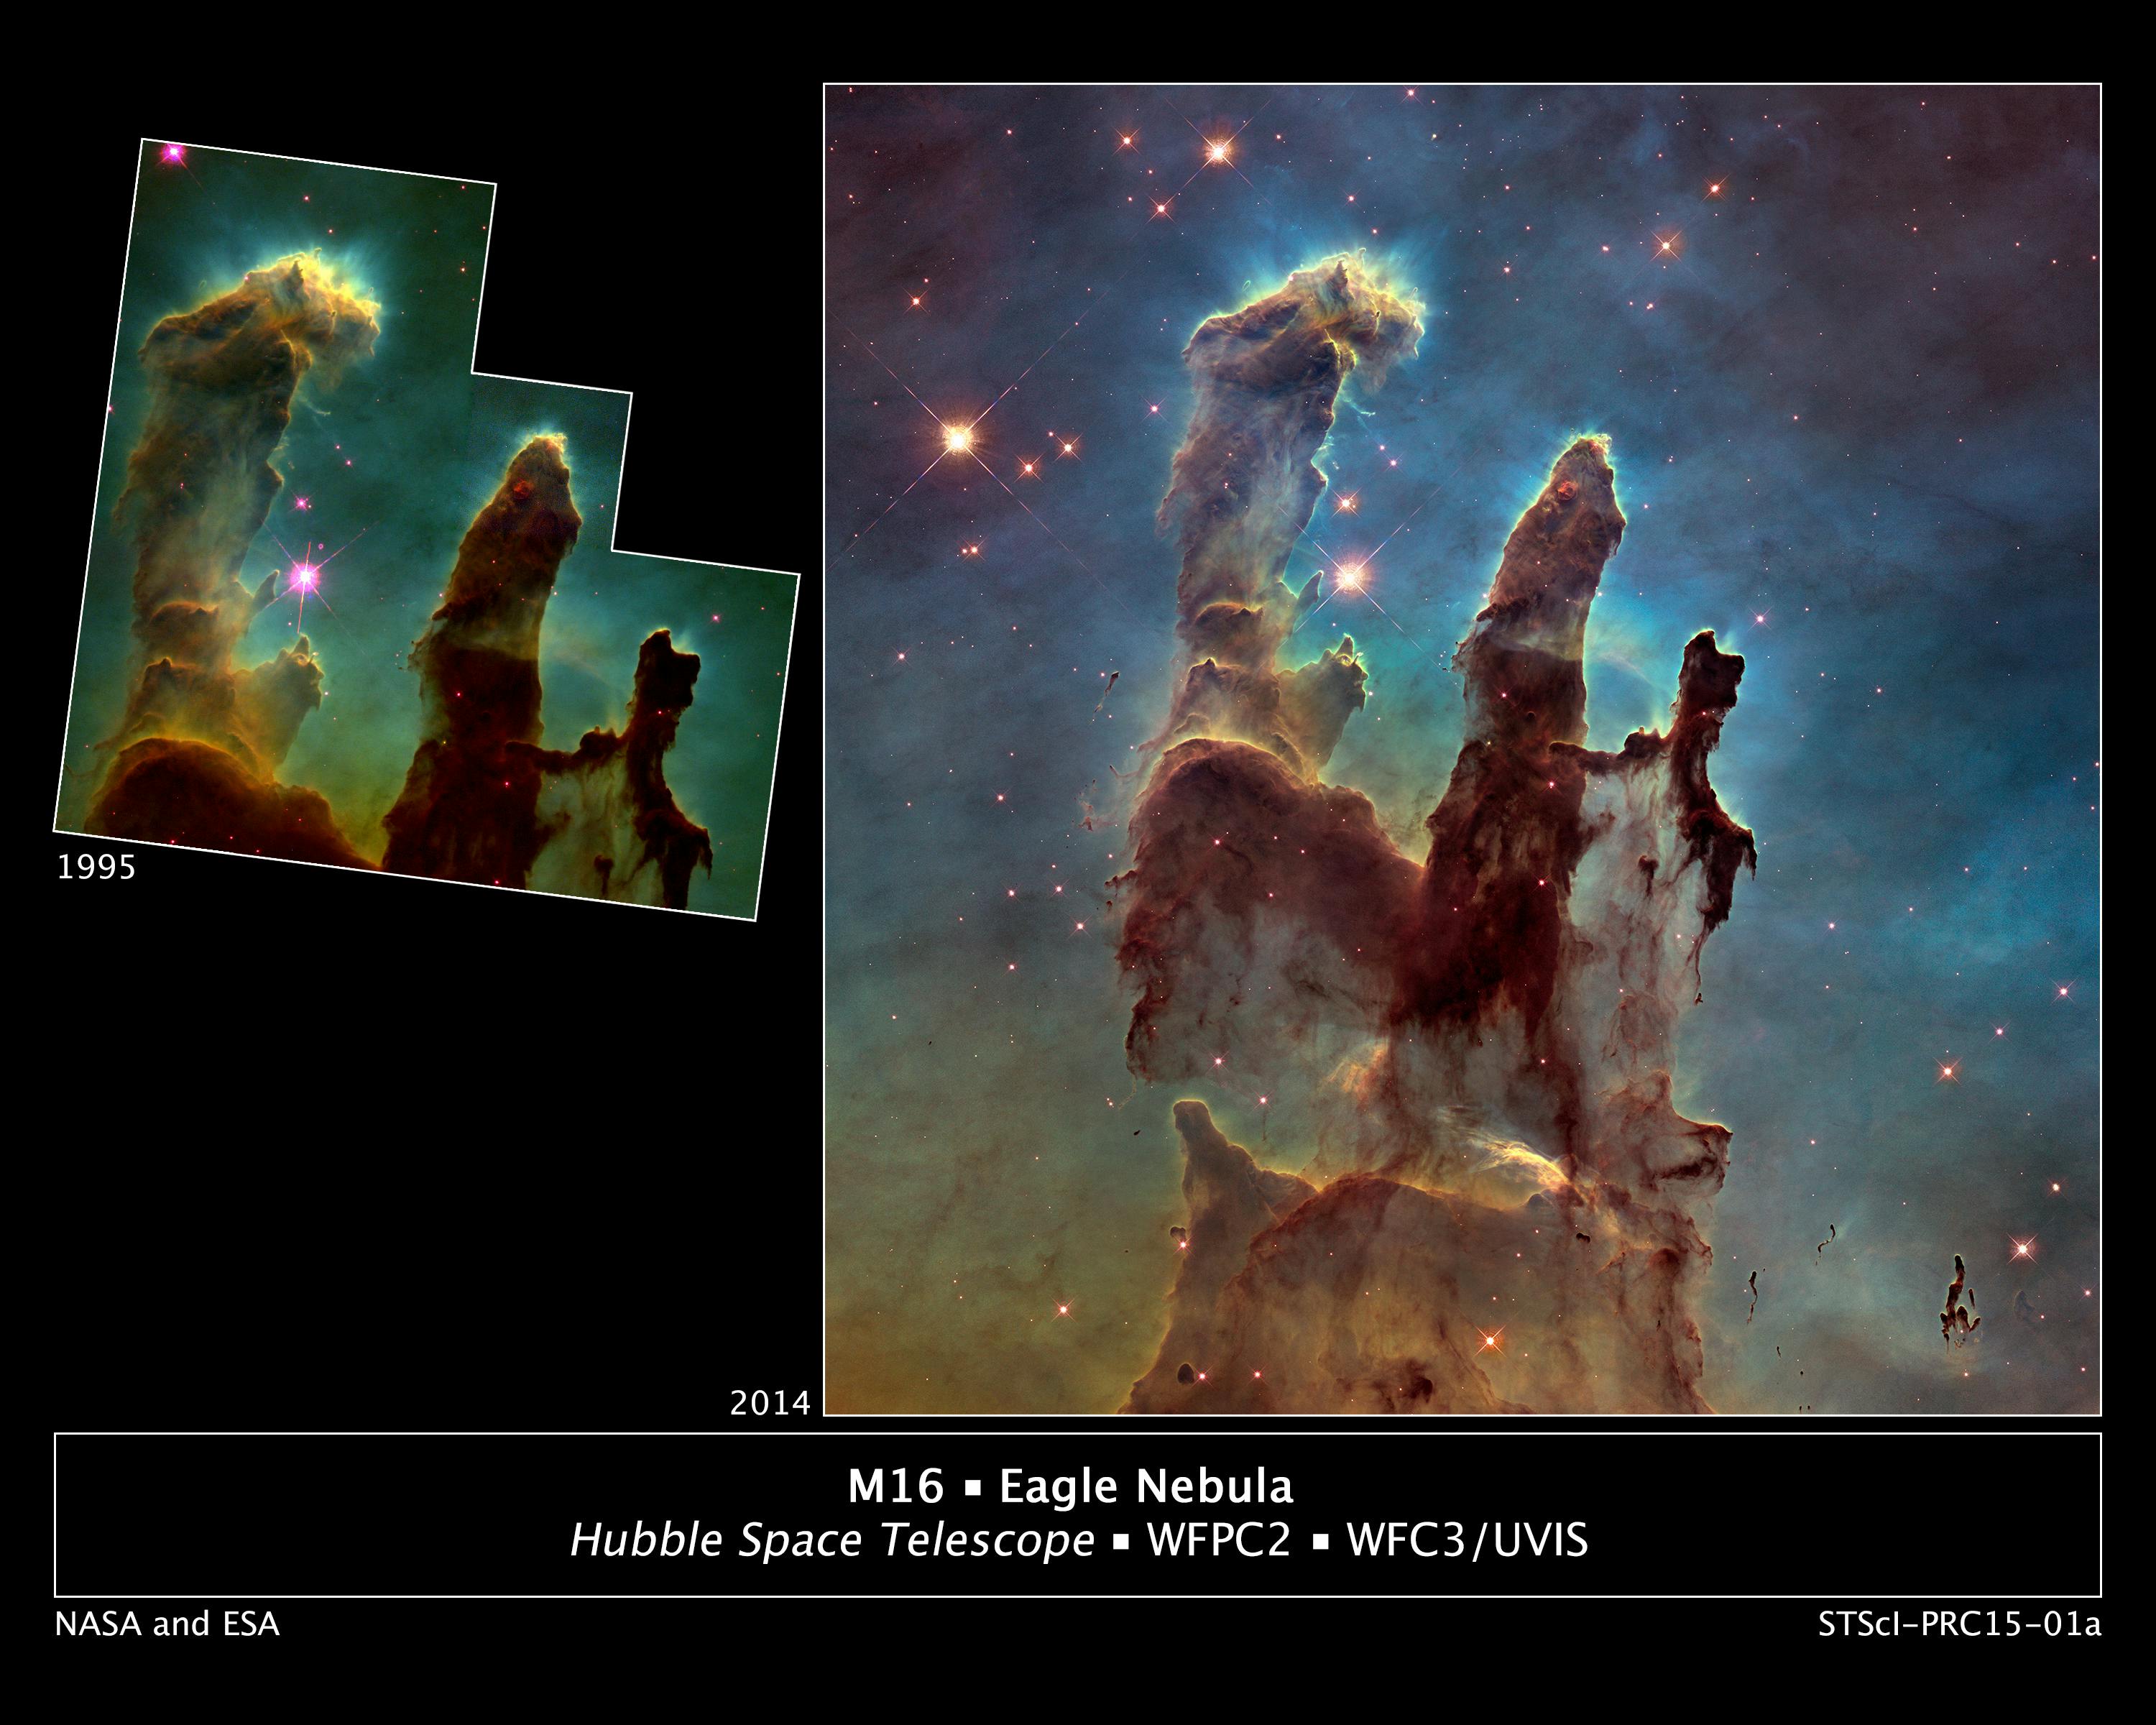 NASA caption: Astronomers using NASA's Hubble Space Telescope have assembled a bigger and sharper photograph of the iconic Eagle Nebula's "Pillars of Creation" (right); the original 1995 Hubble image is shown at left. 